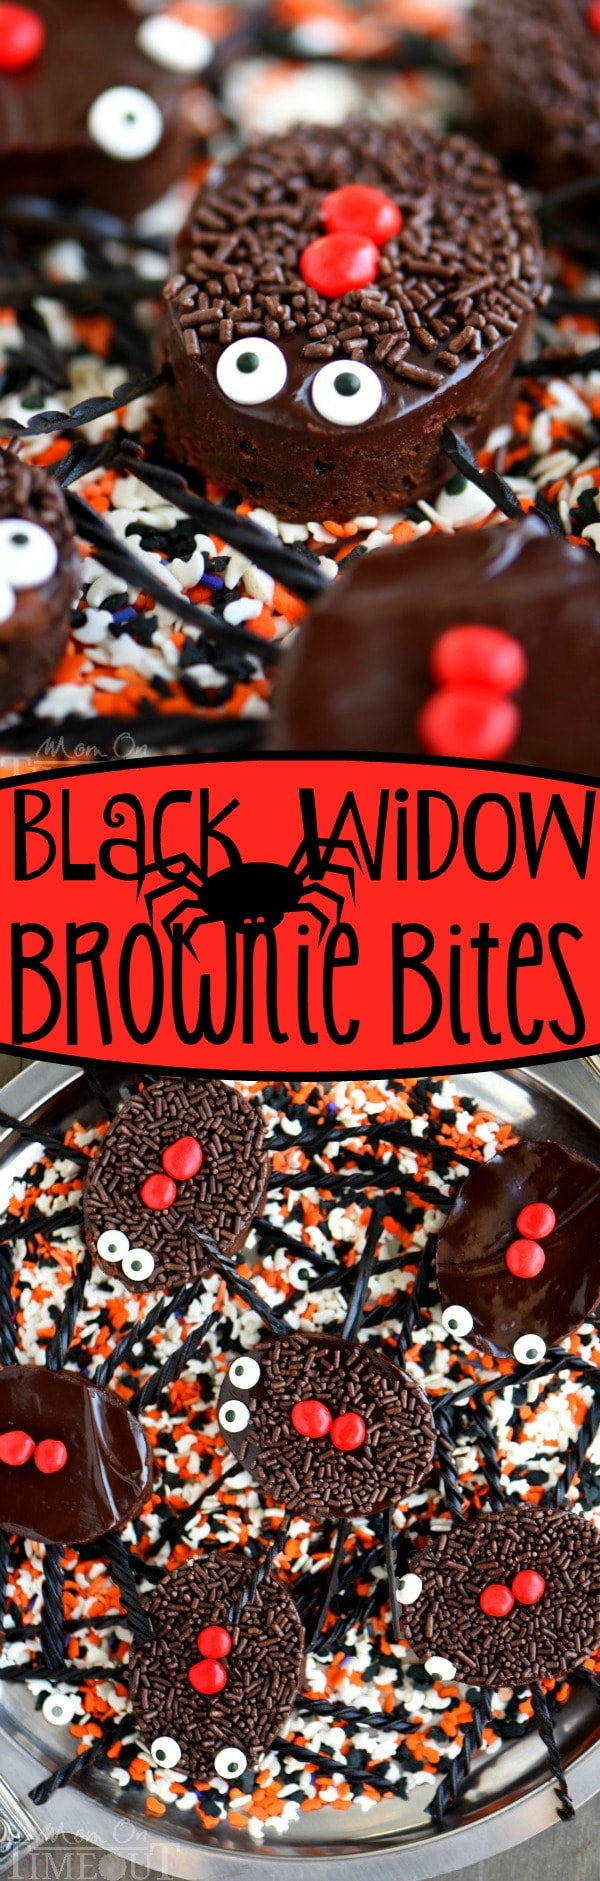 Frightfully delicious and eerily decadent, these Black Widow Brownie Bites are sure to be a HUGE hit at your Halloween party this year!